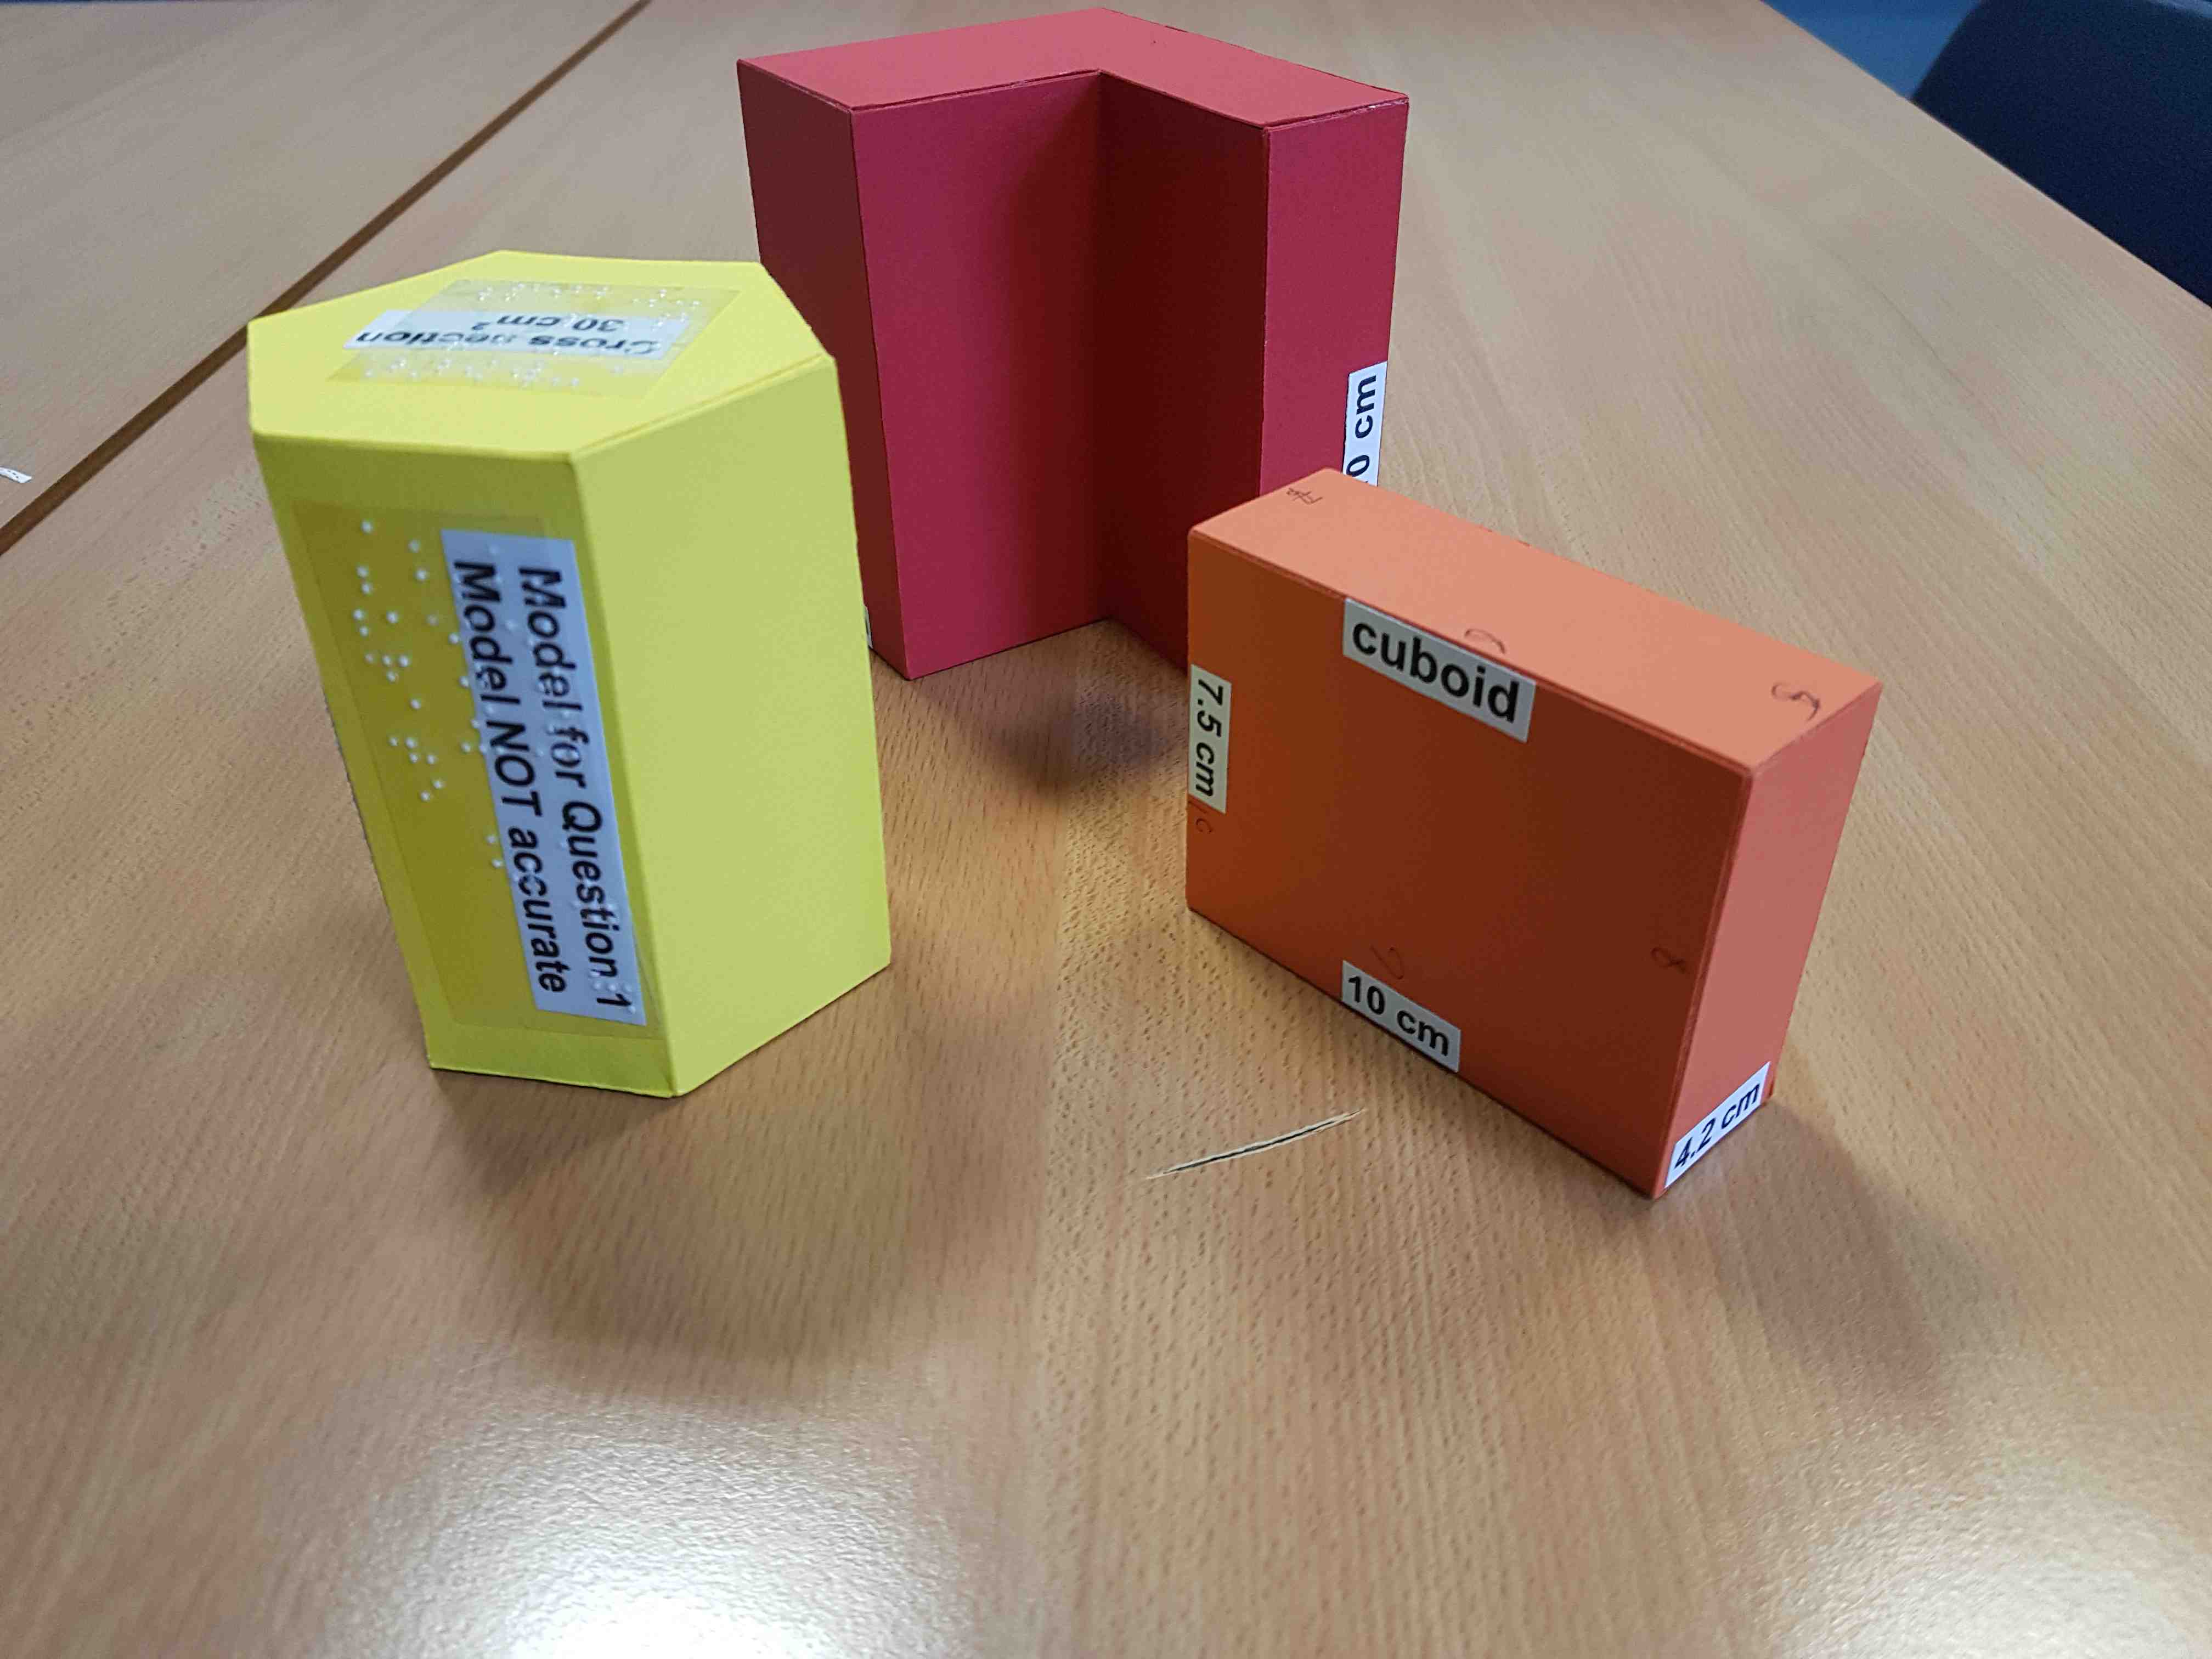 3D shapes with braille labels